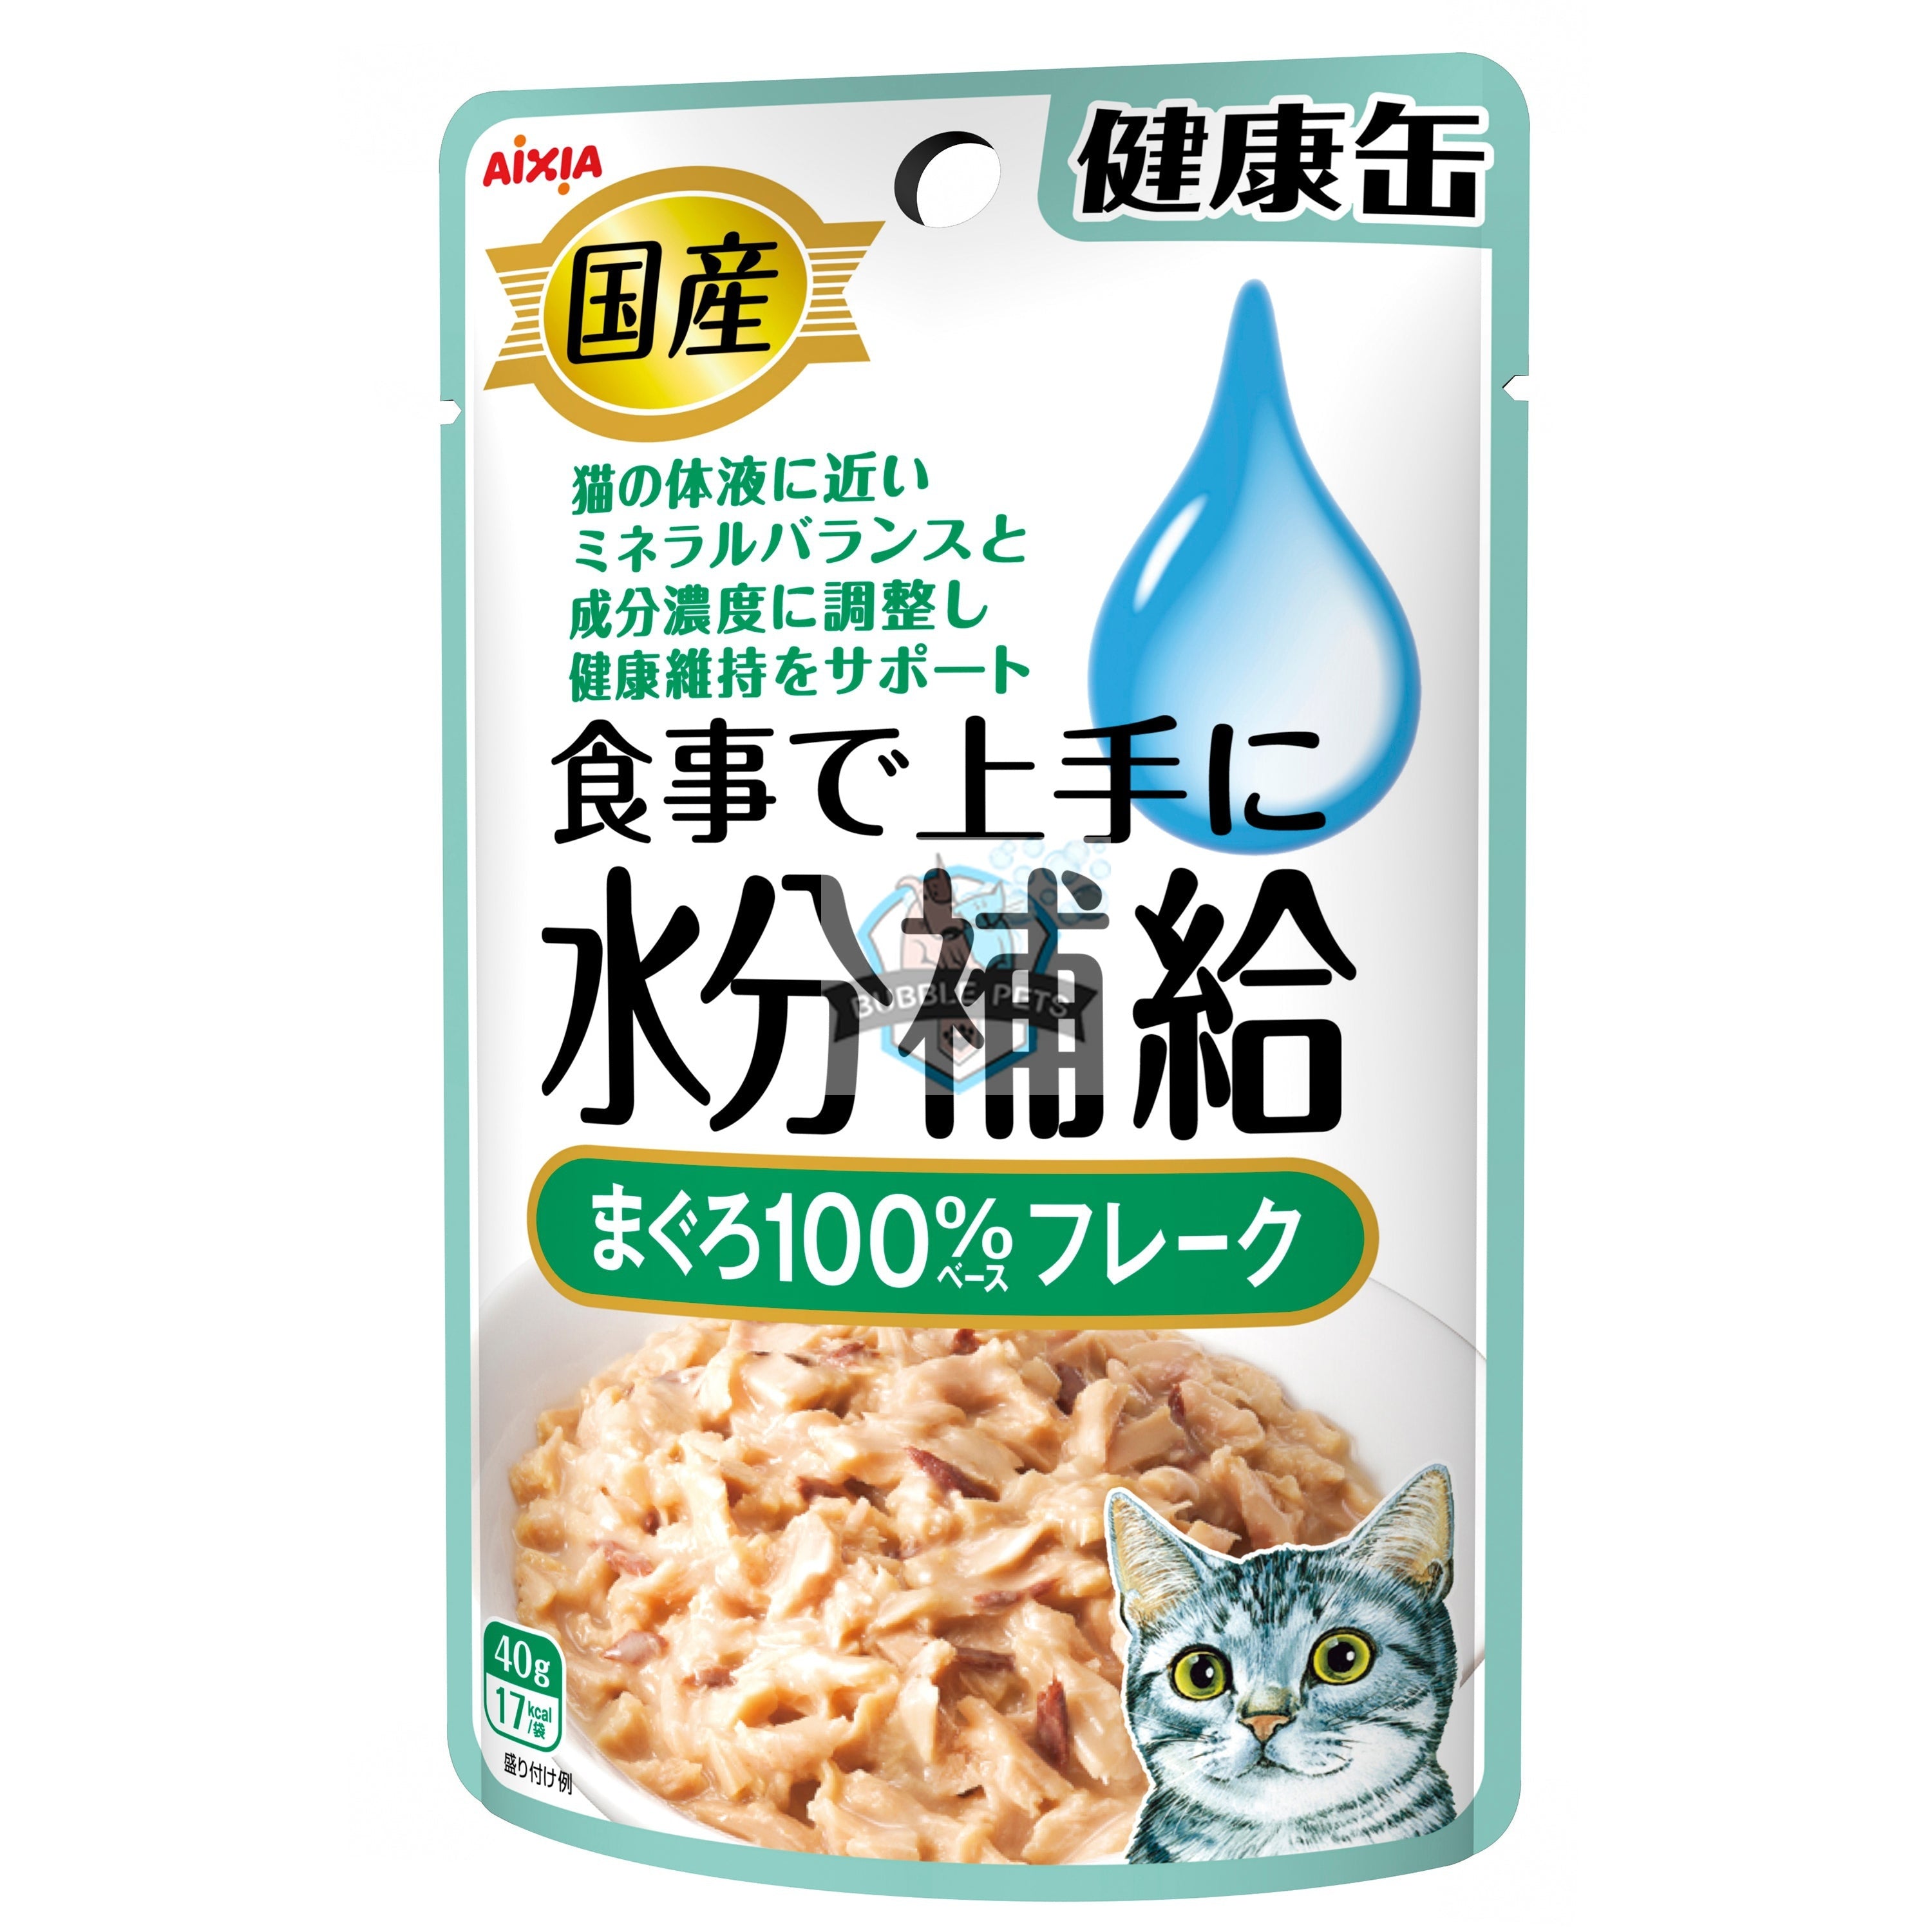 Aixia Kenko Water Supplement Tuna Flakes Pouch